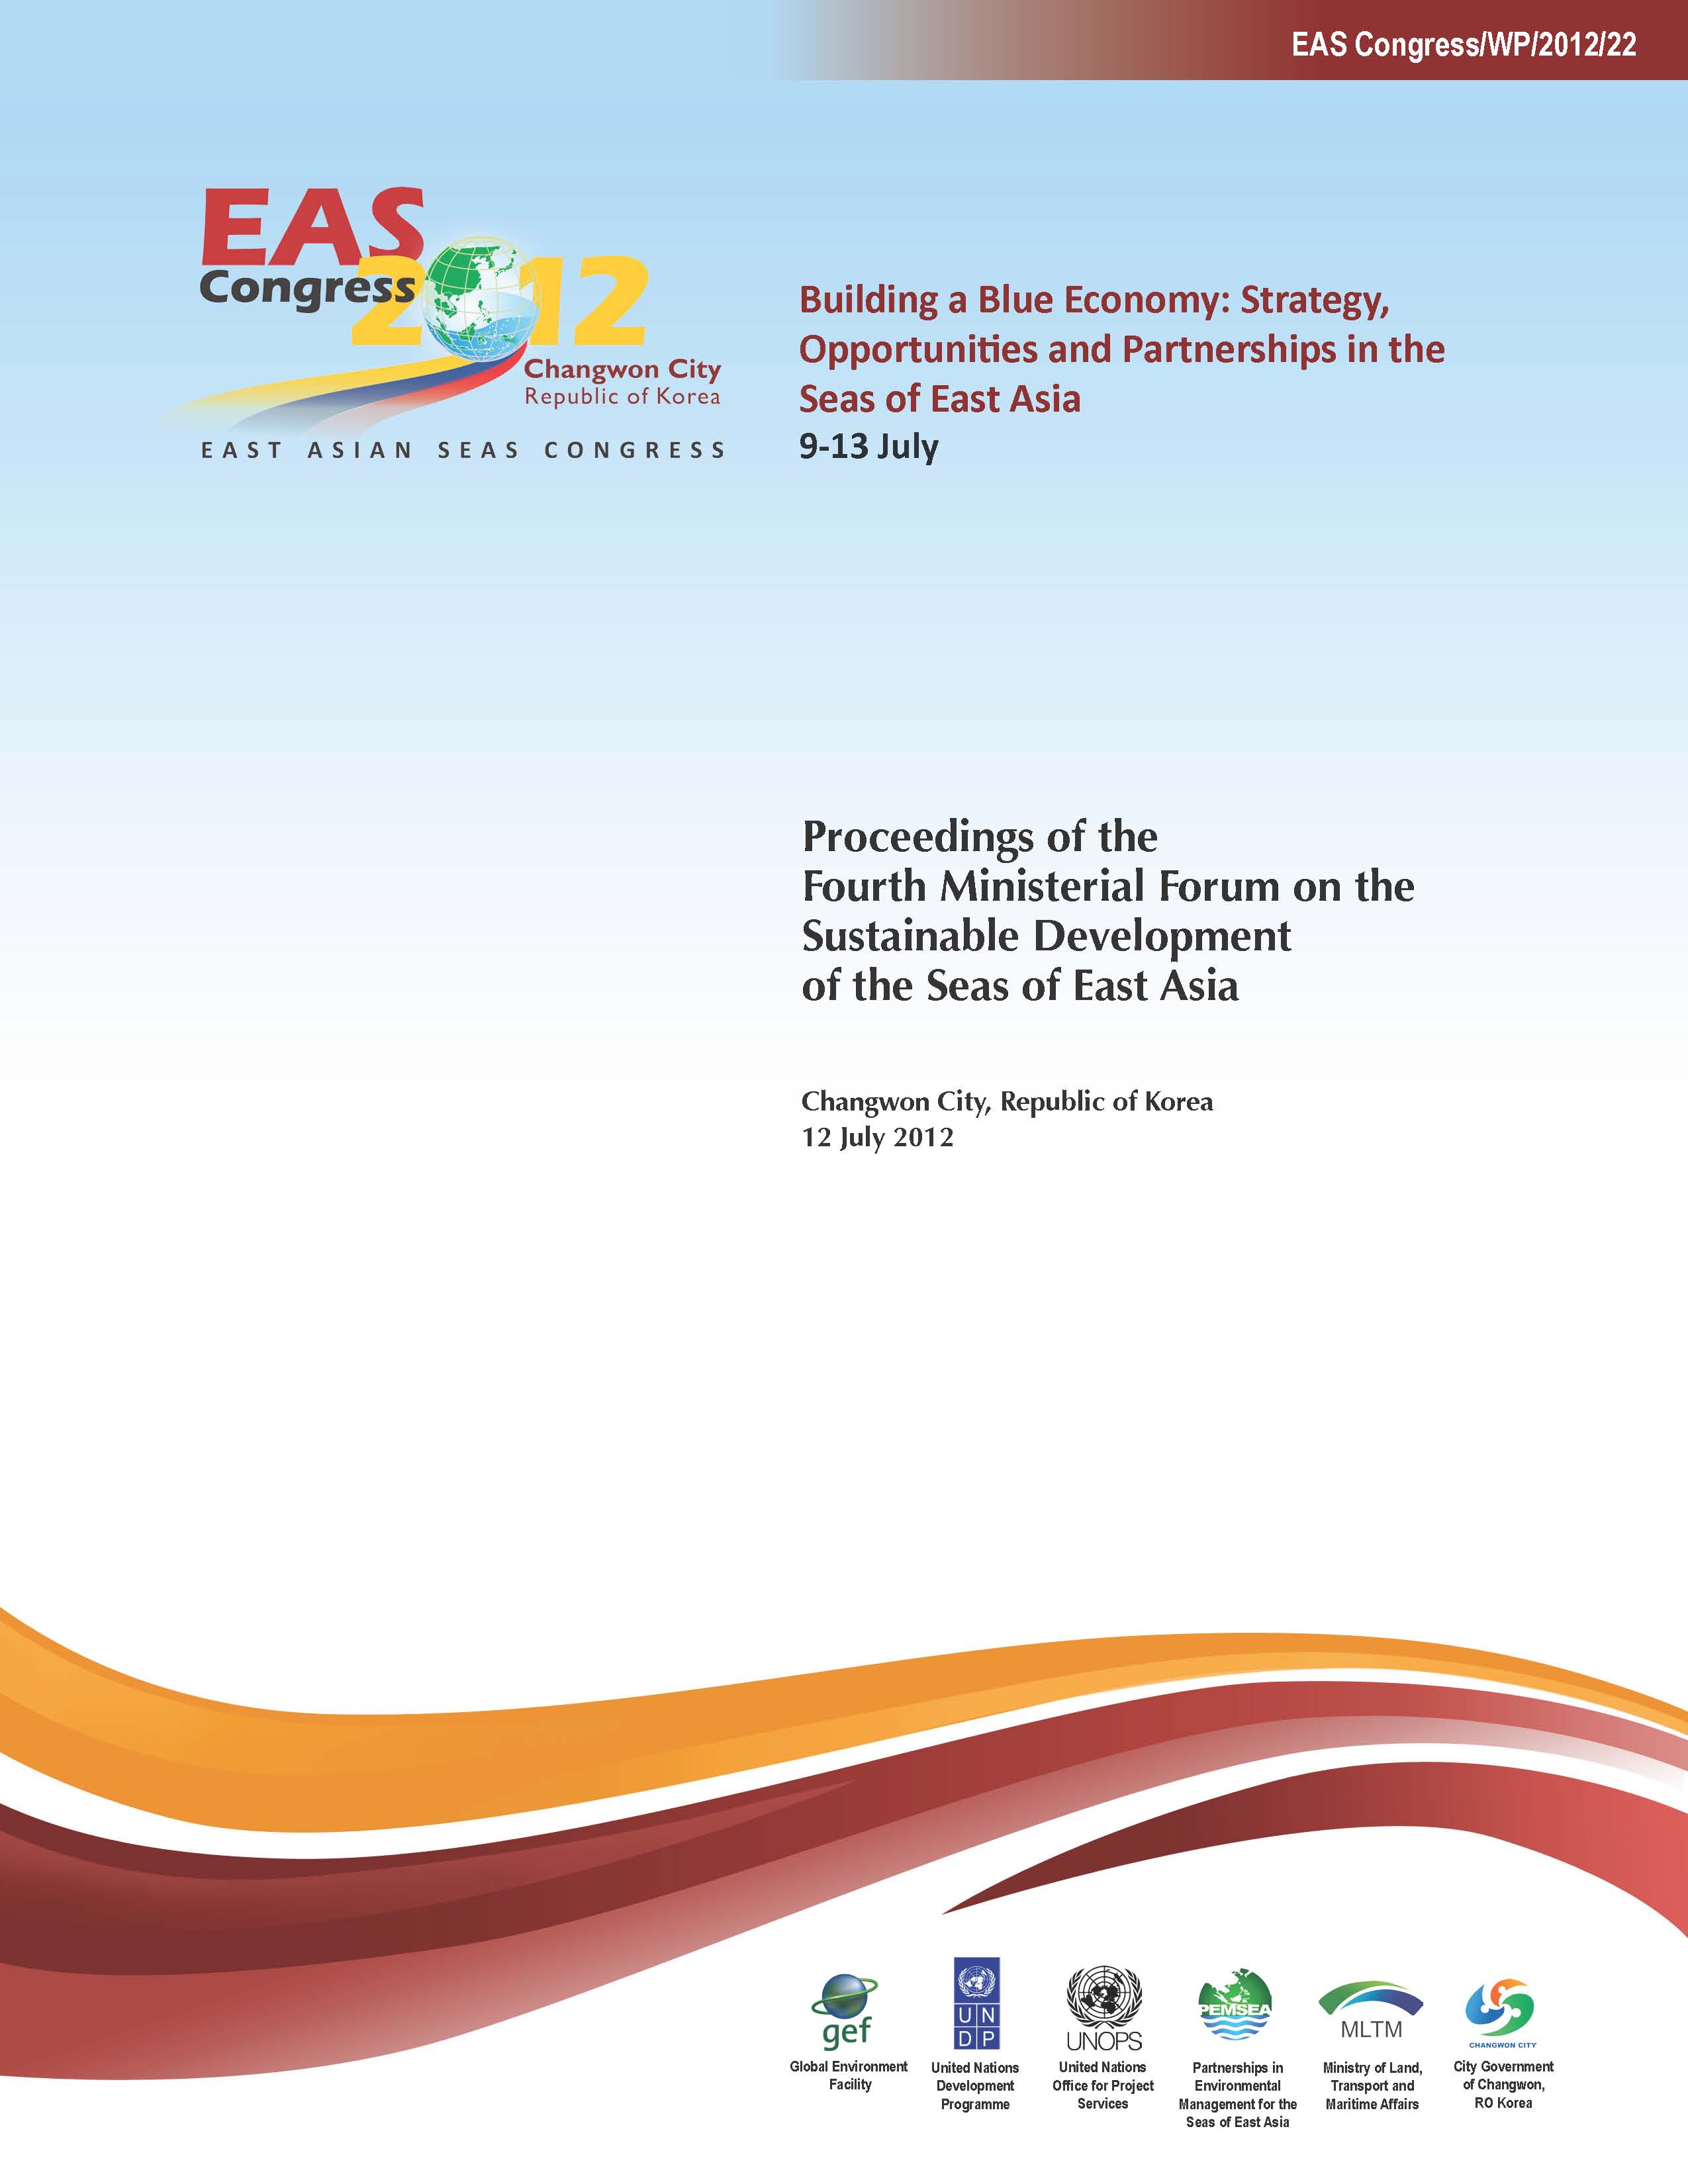 Proceedings of the Fourth Ministerial Forum on the Sustainable Development of the Seas of East Asia